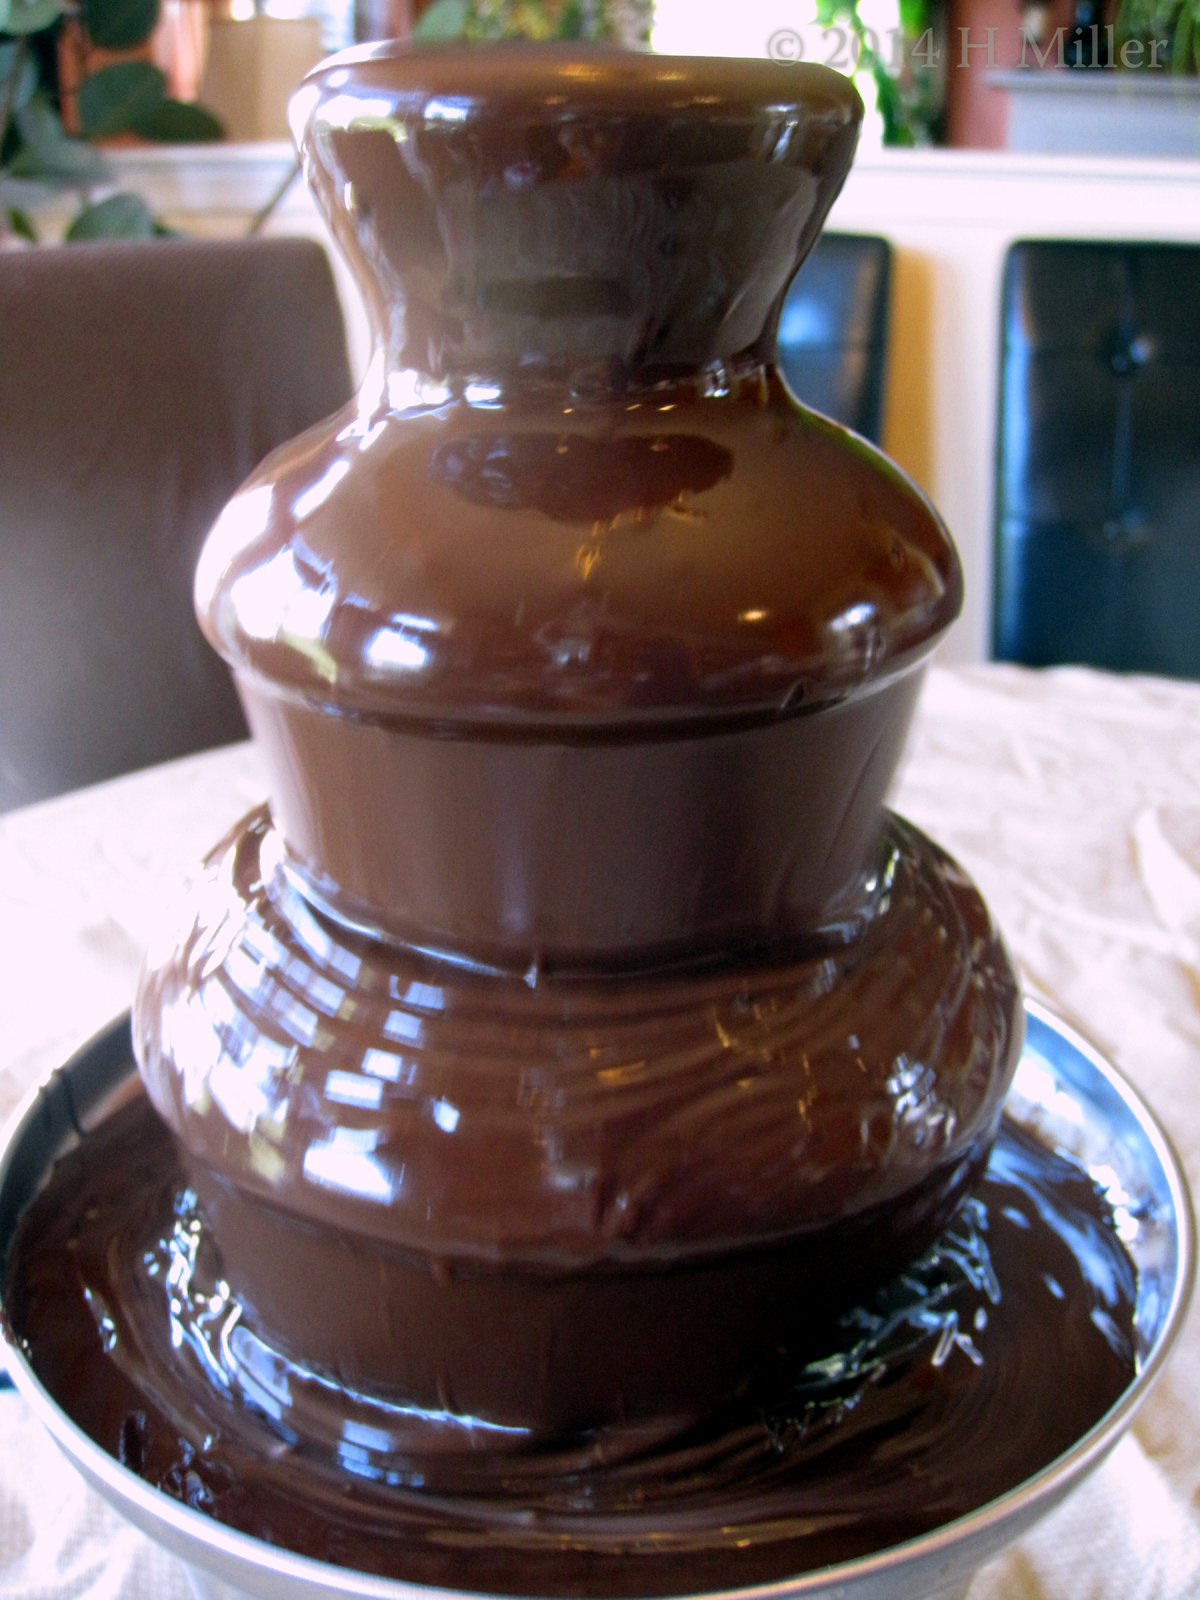 Chocolate Fountains Are Always Fun To Watch!